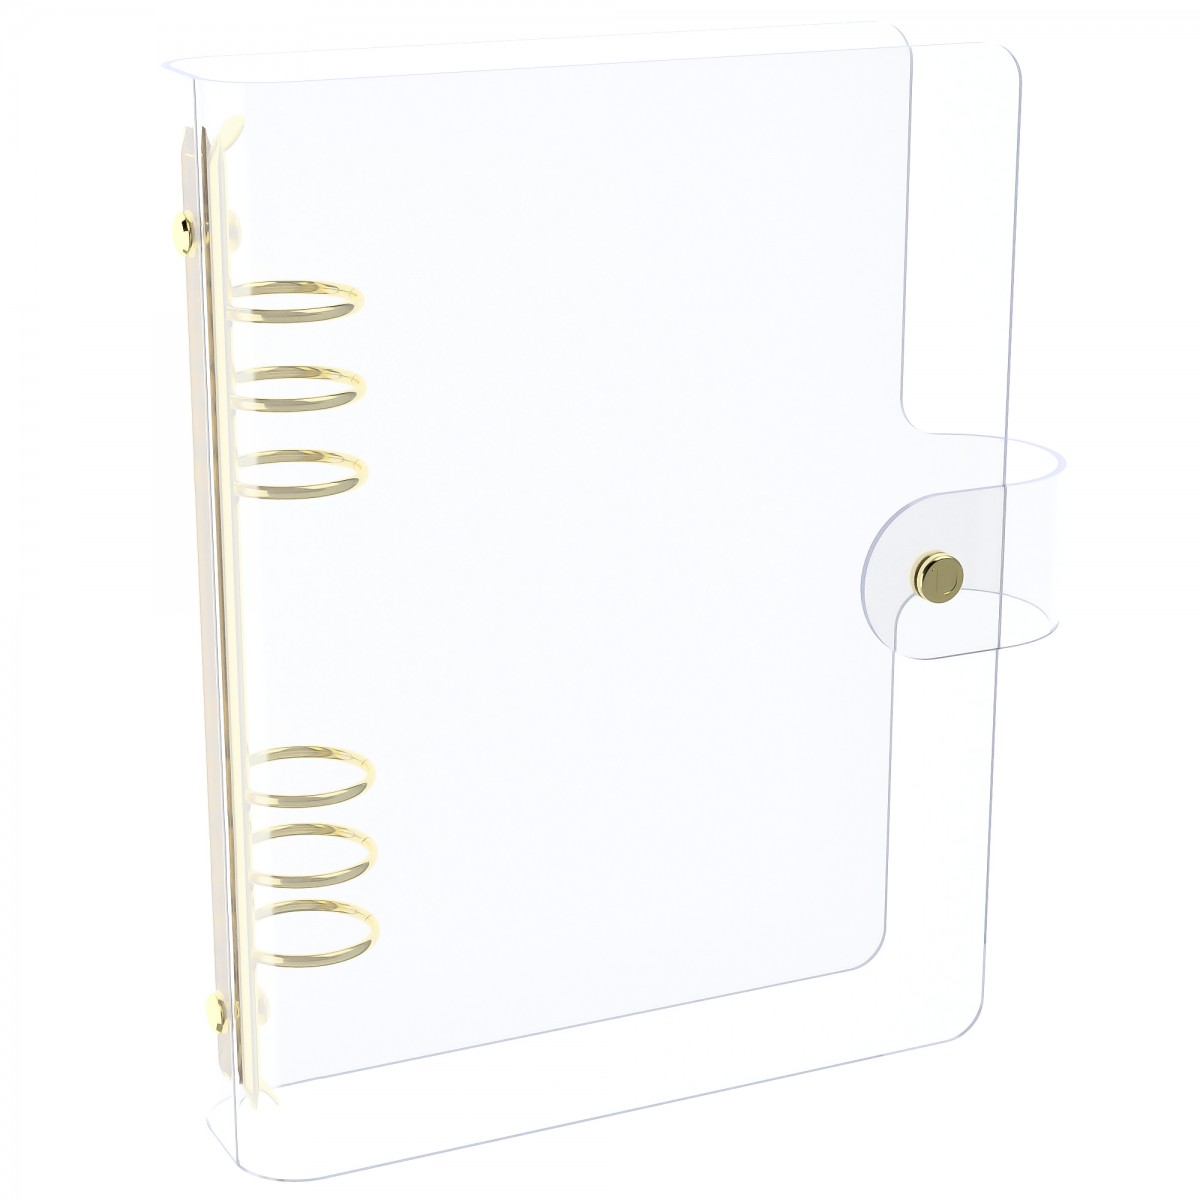 DISCAGENDA CLARITY CLEAR SEE THROUGH PVC PLANNER COVER - RINGBOUND, A5 SIZE, GOLD